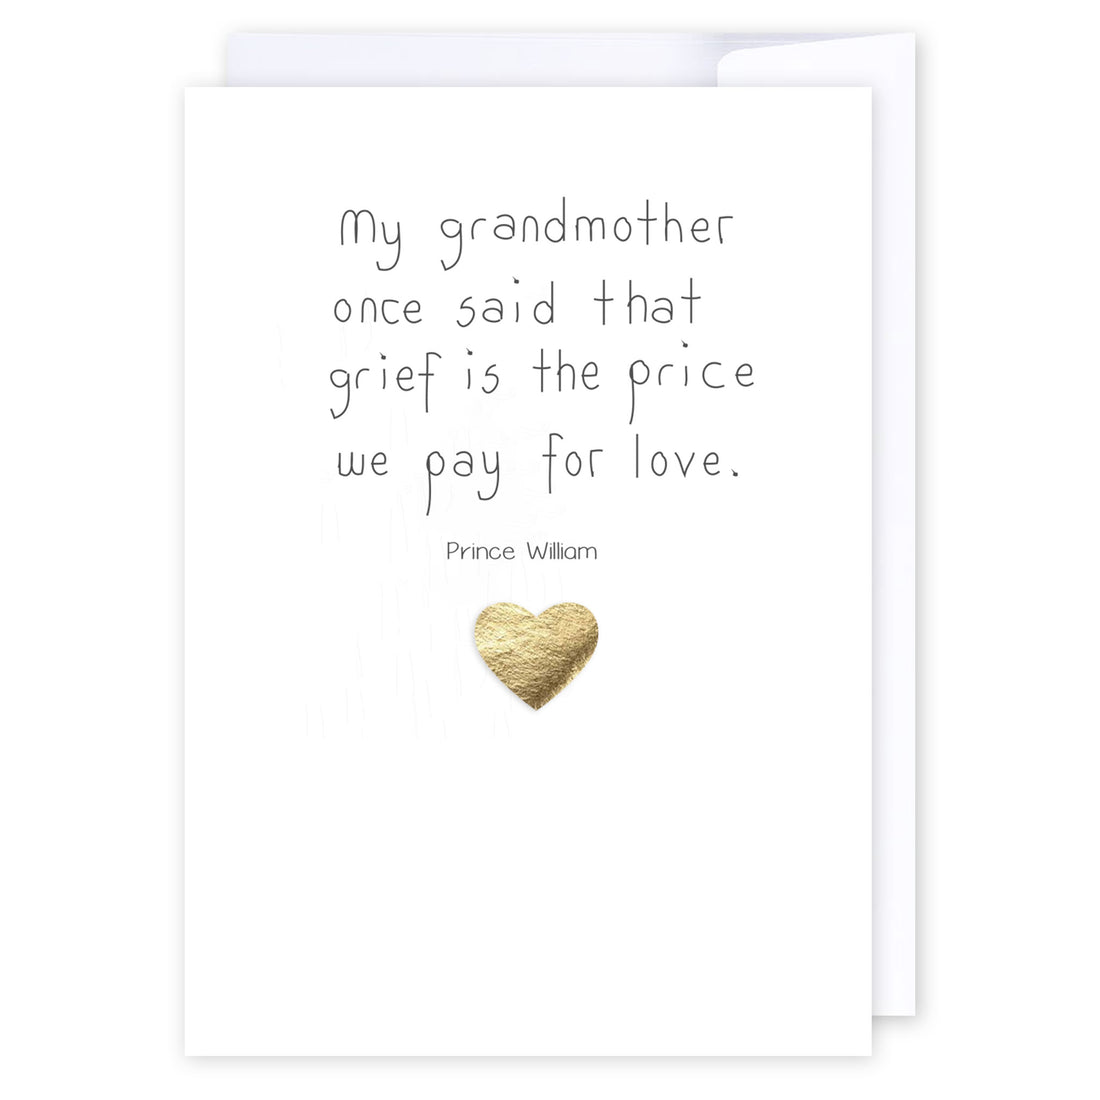 Grief and love